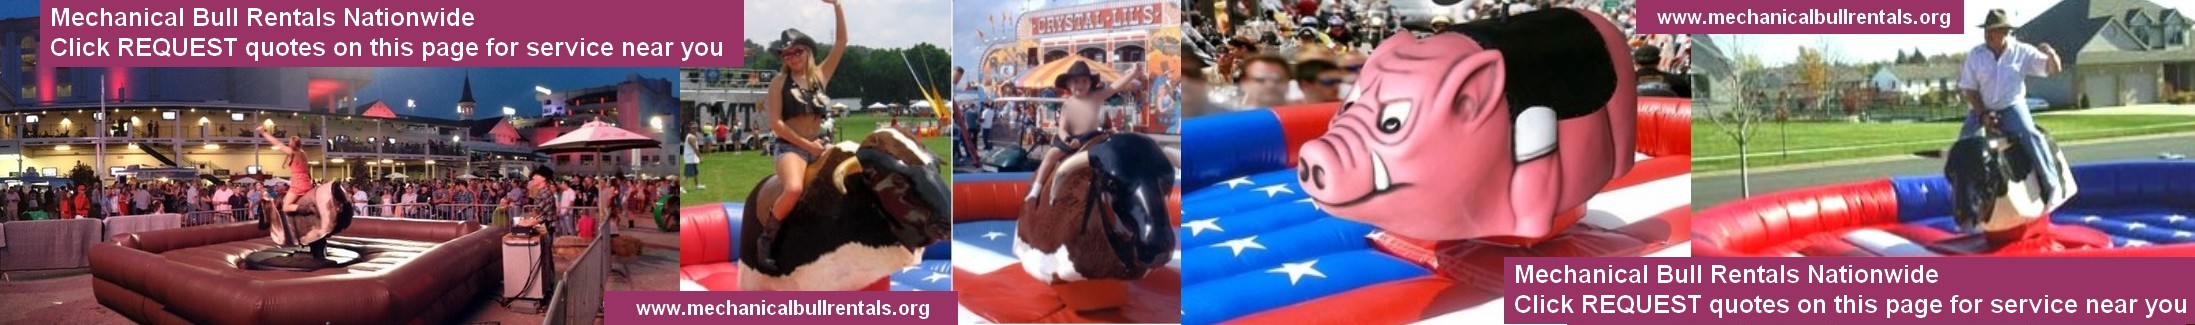 Mechanical Bull Rentals Belmar New Jersey NJ and near you. Free referrals to local mechanical bull companies LOGO